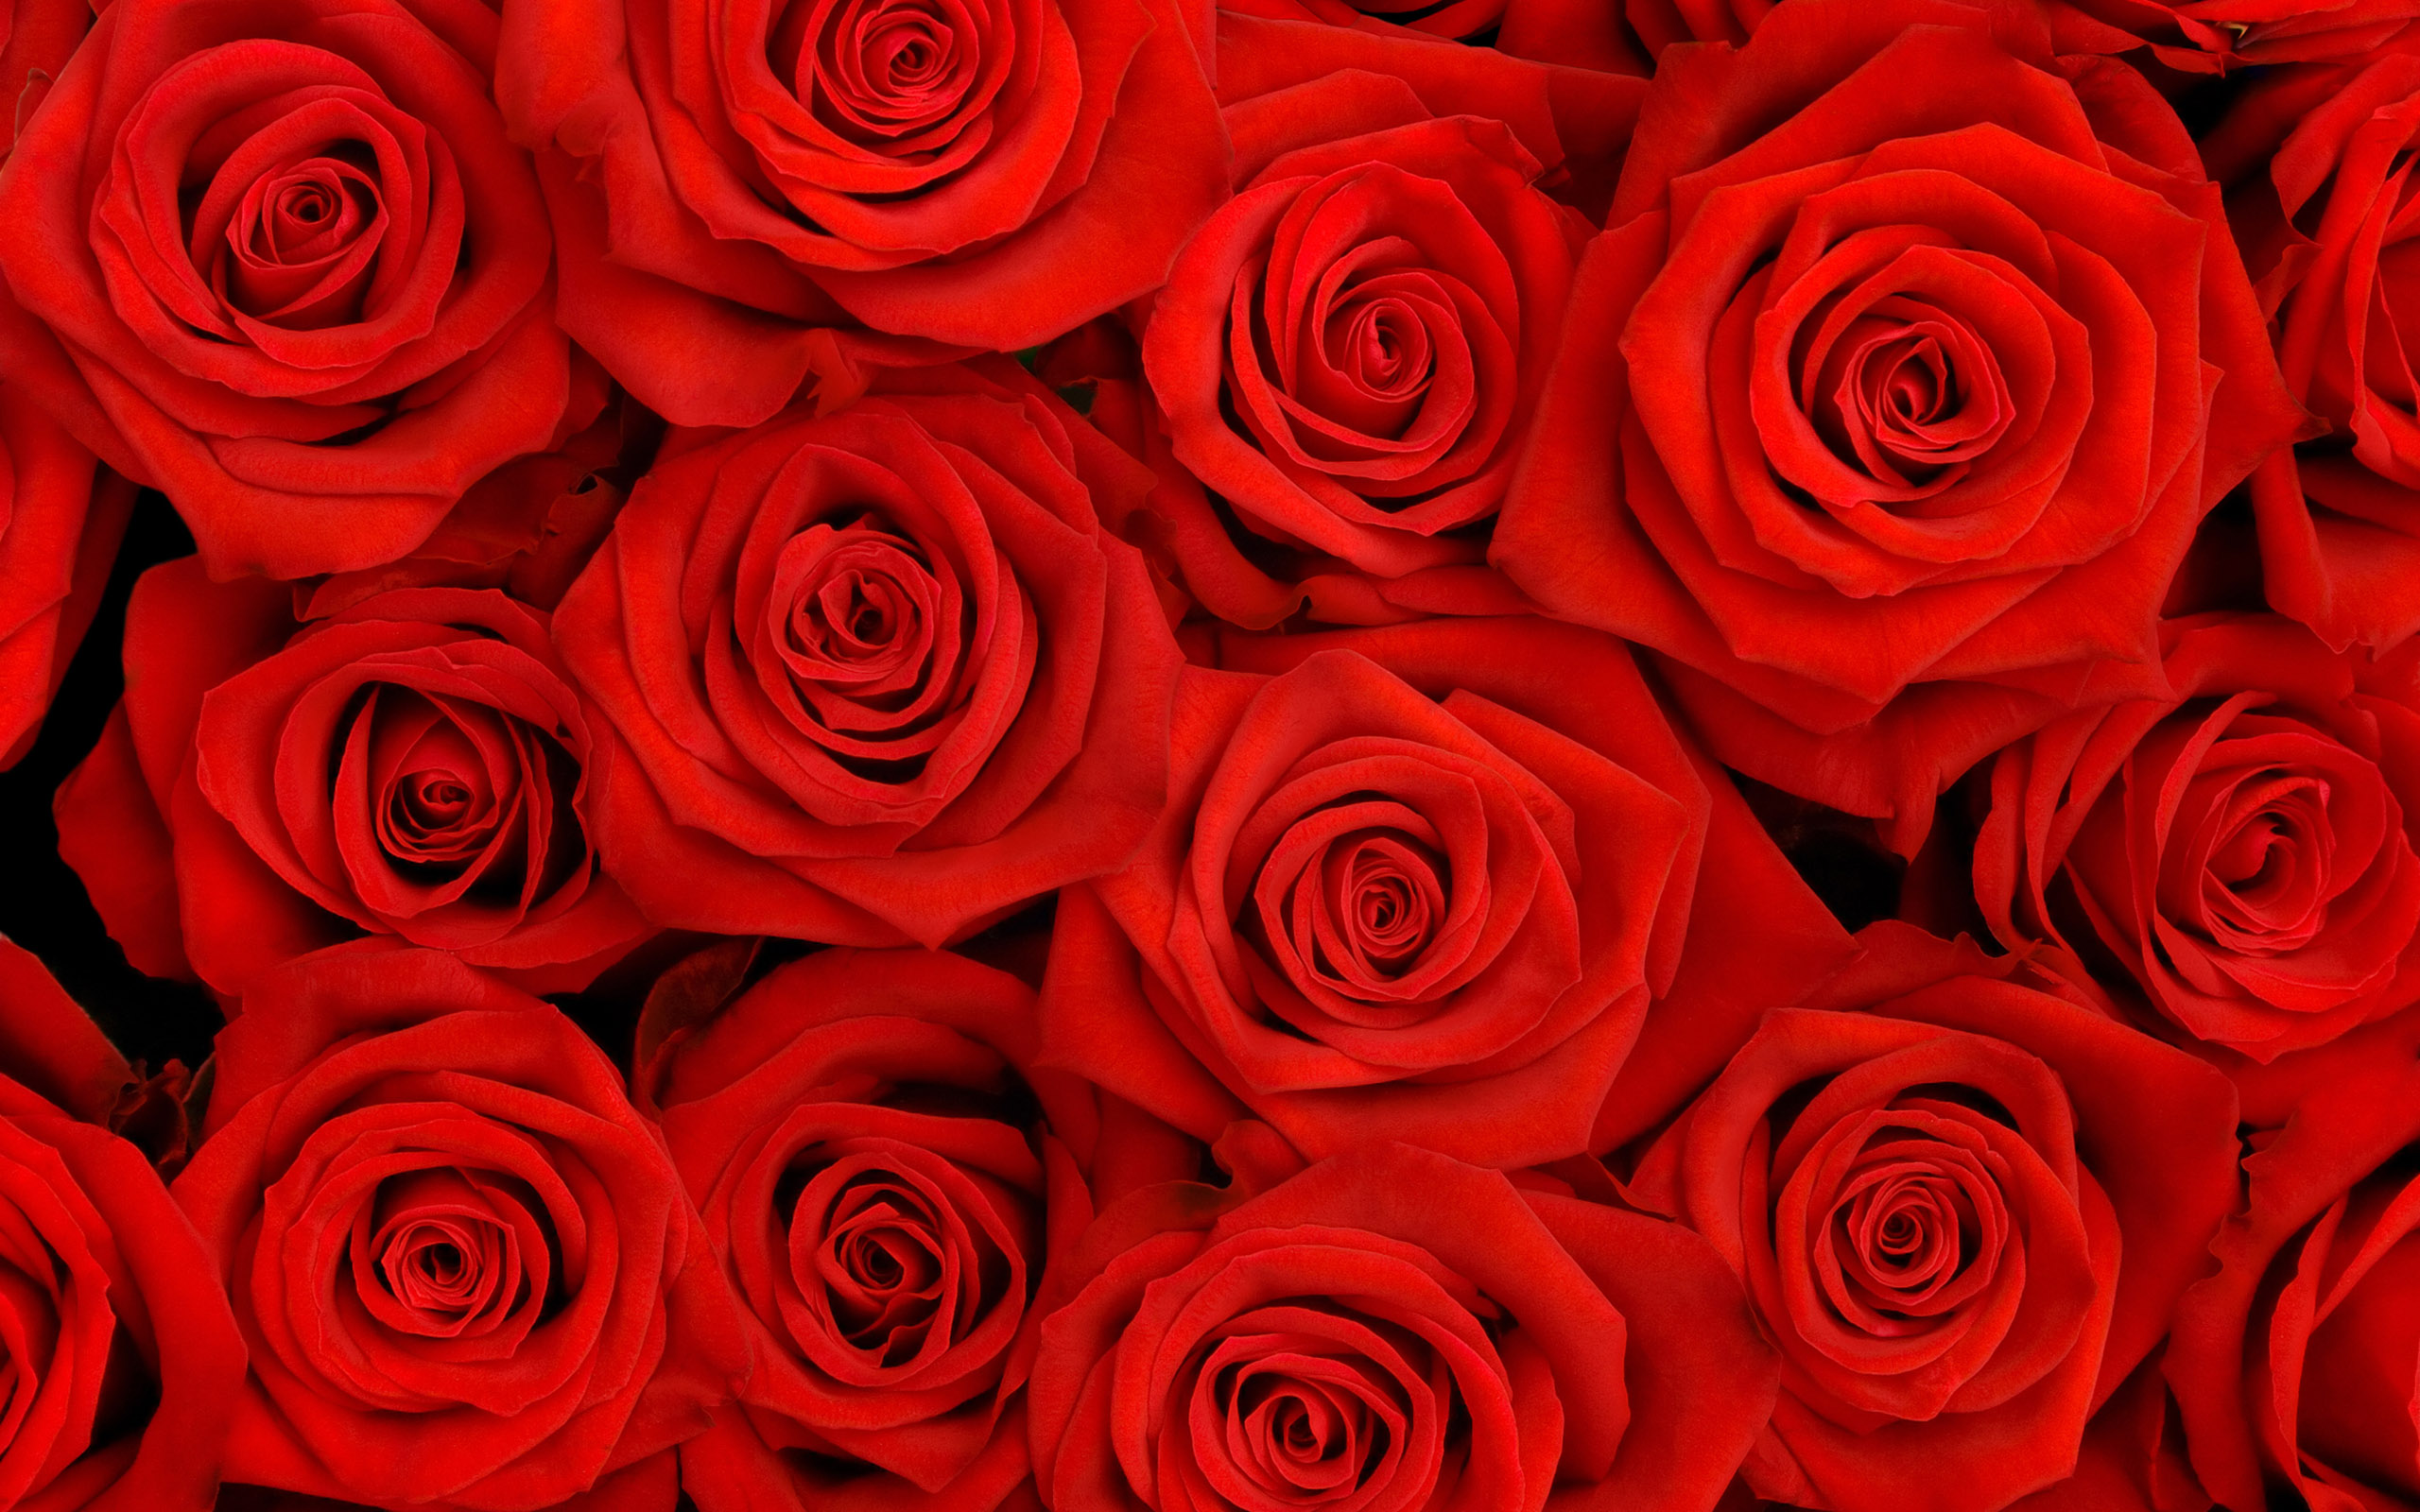 Lovely Roses HQ Wallpapers HD Wallpapers 2560x1600